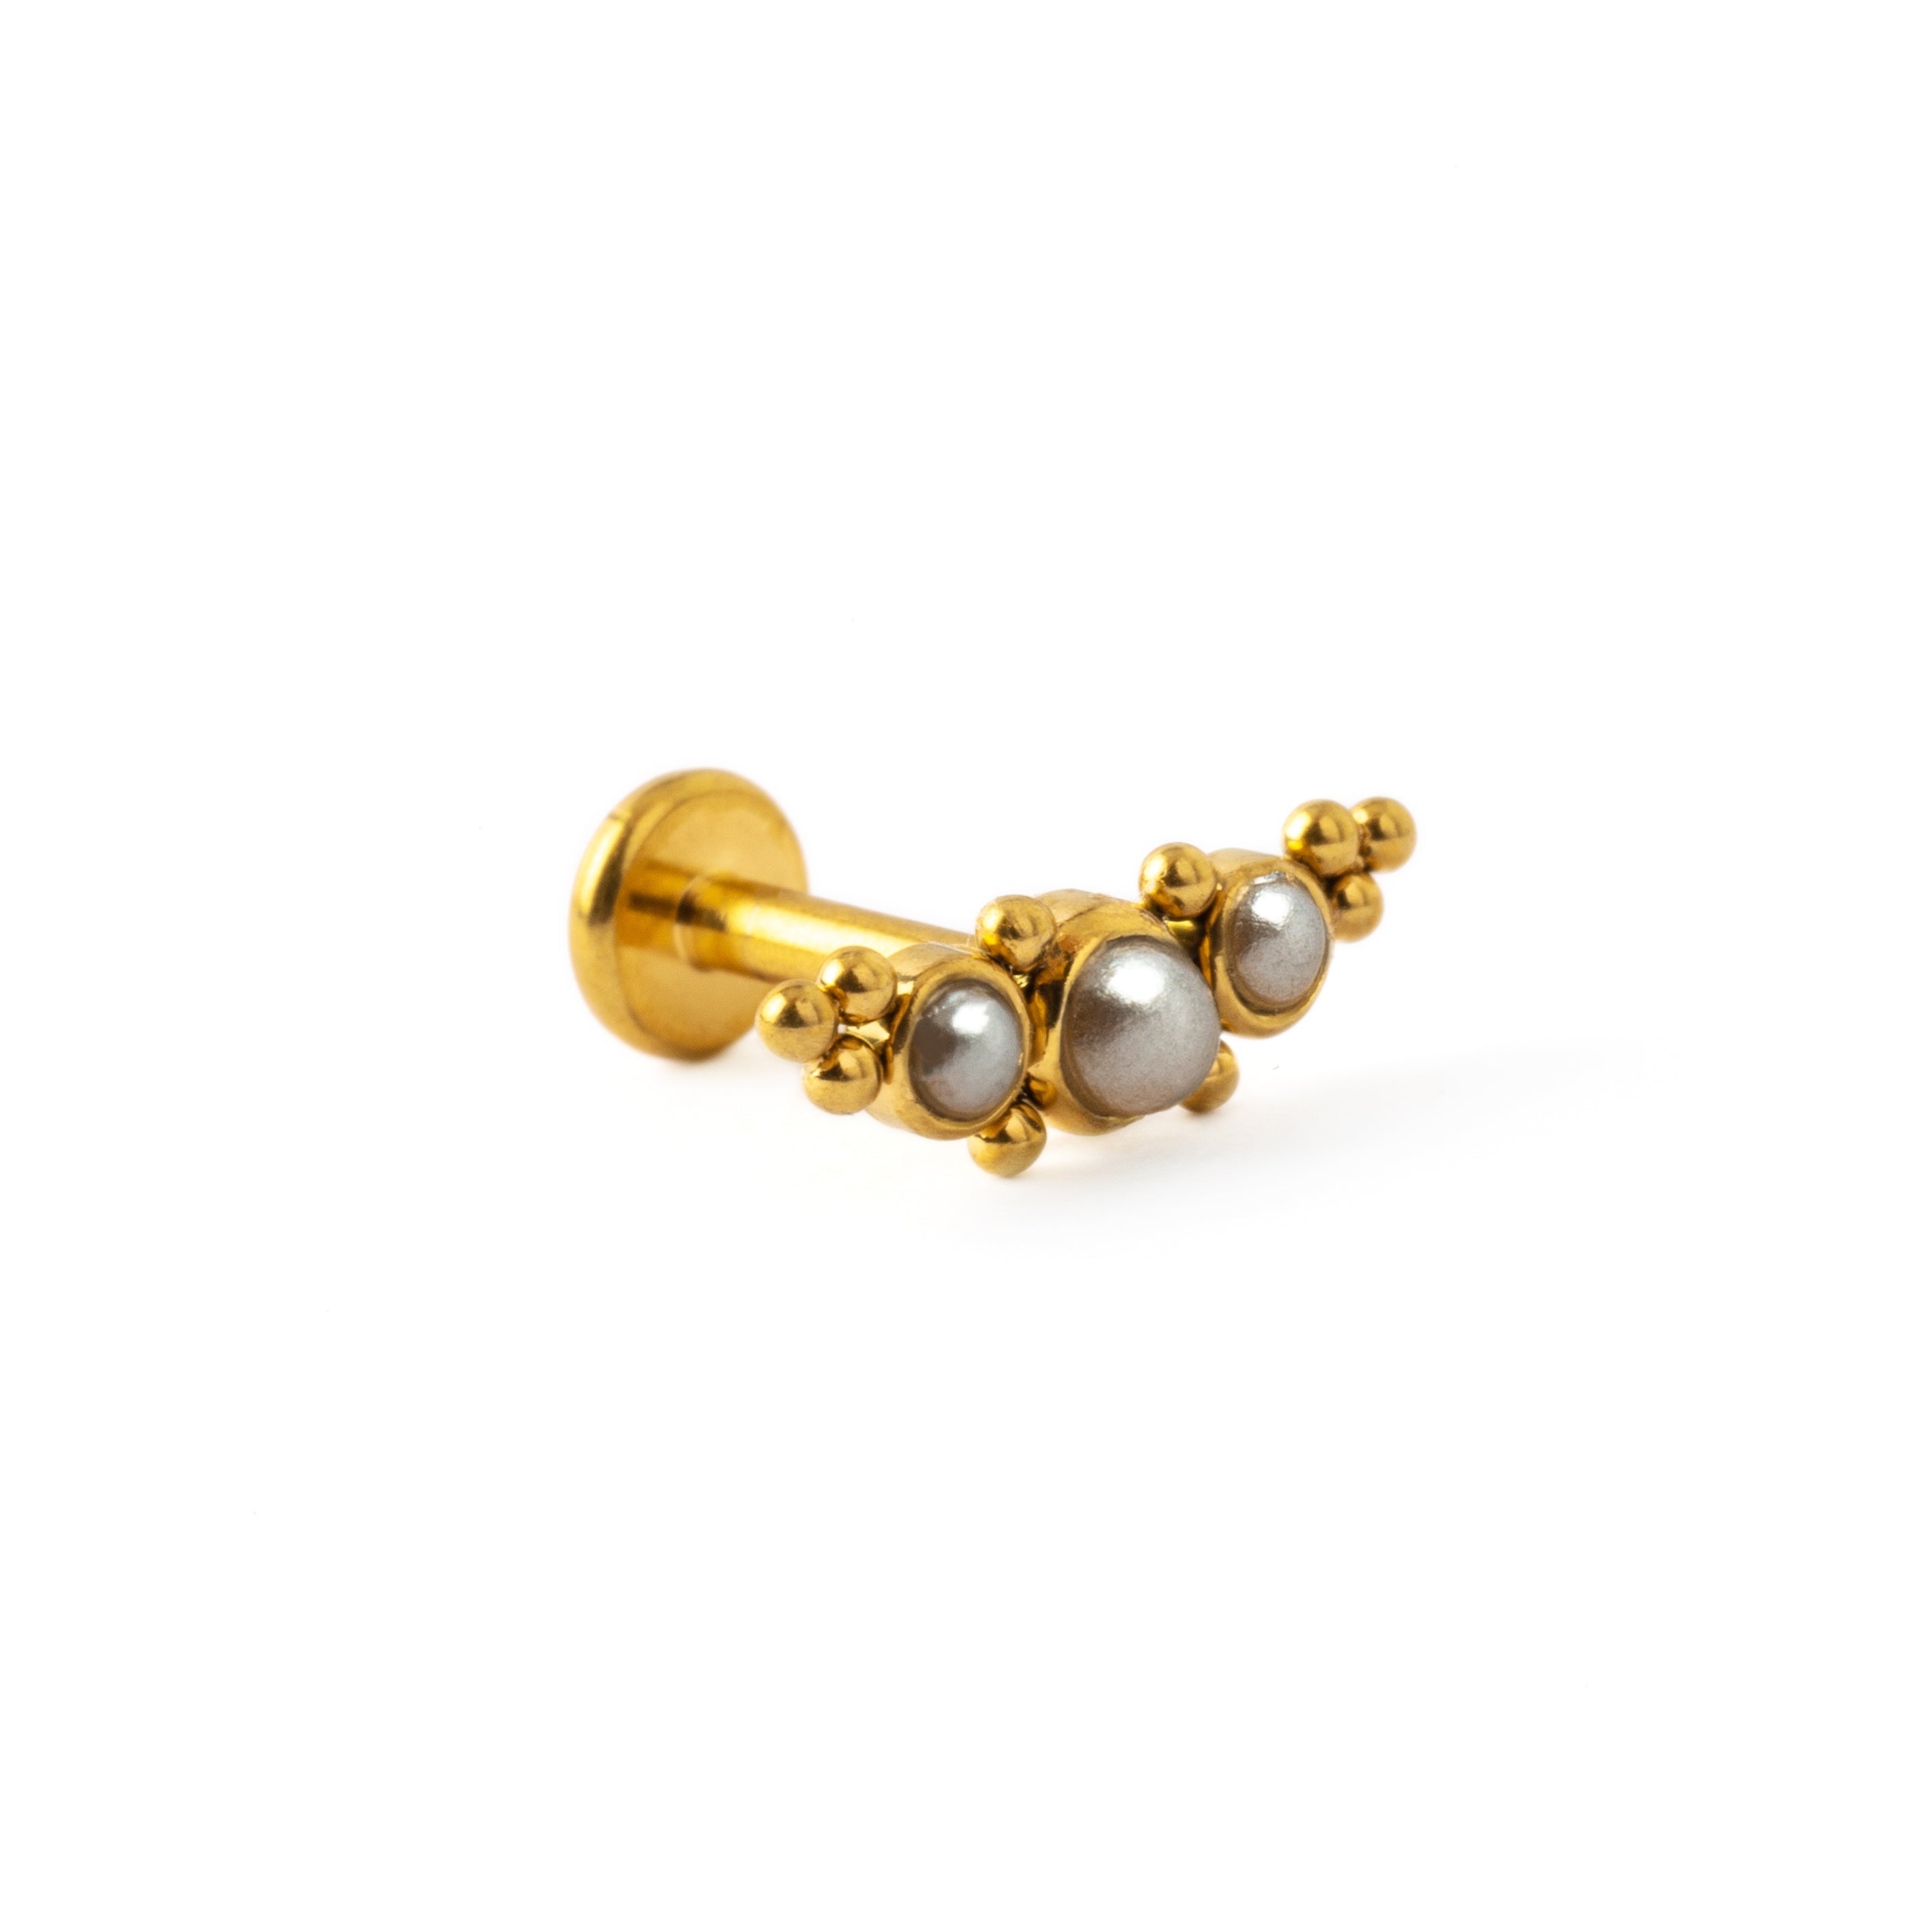 Deva Golden surgical steel Labret with Pearls left side view